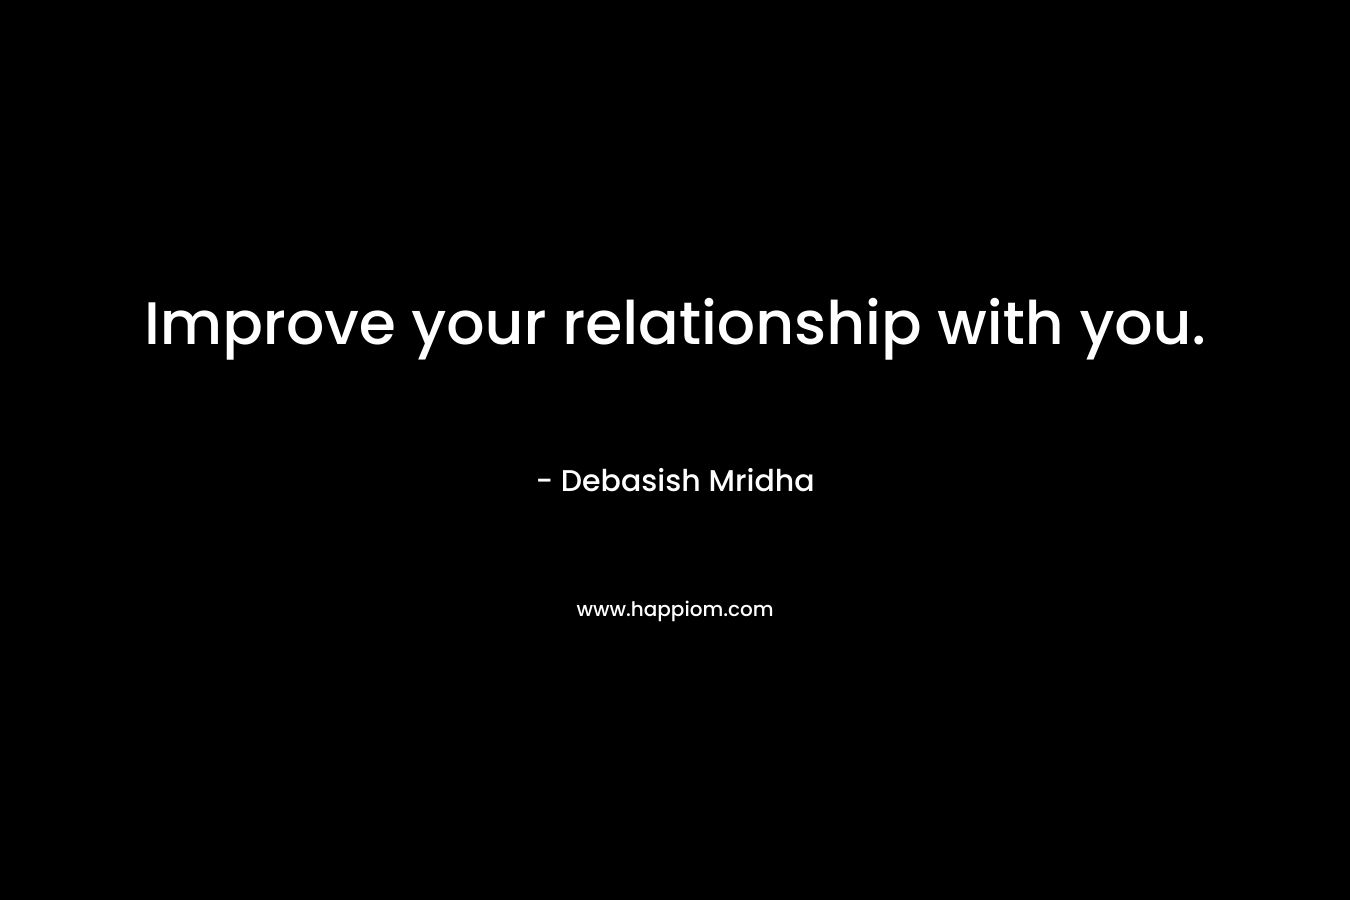 Improve your relationship with you.